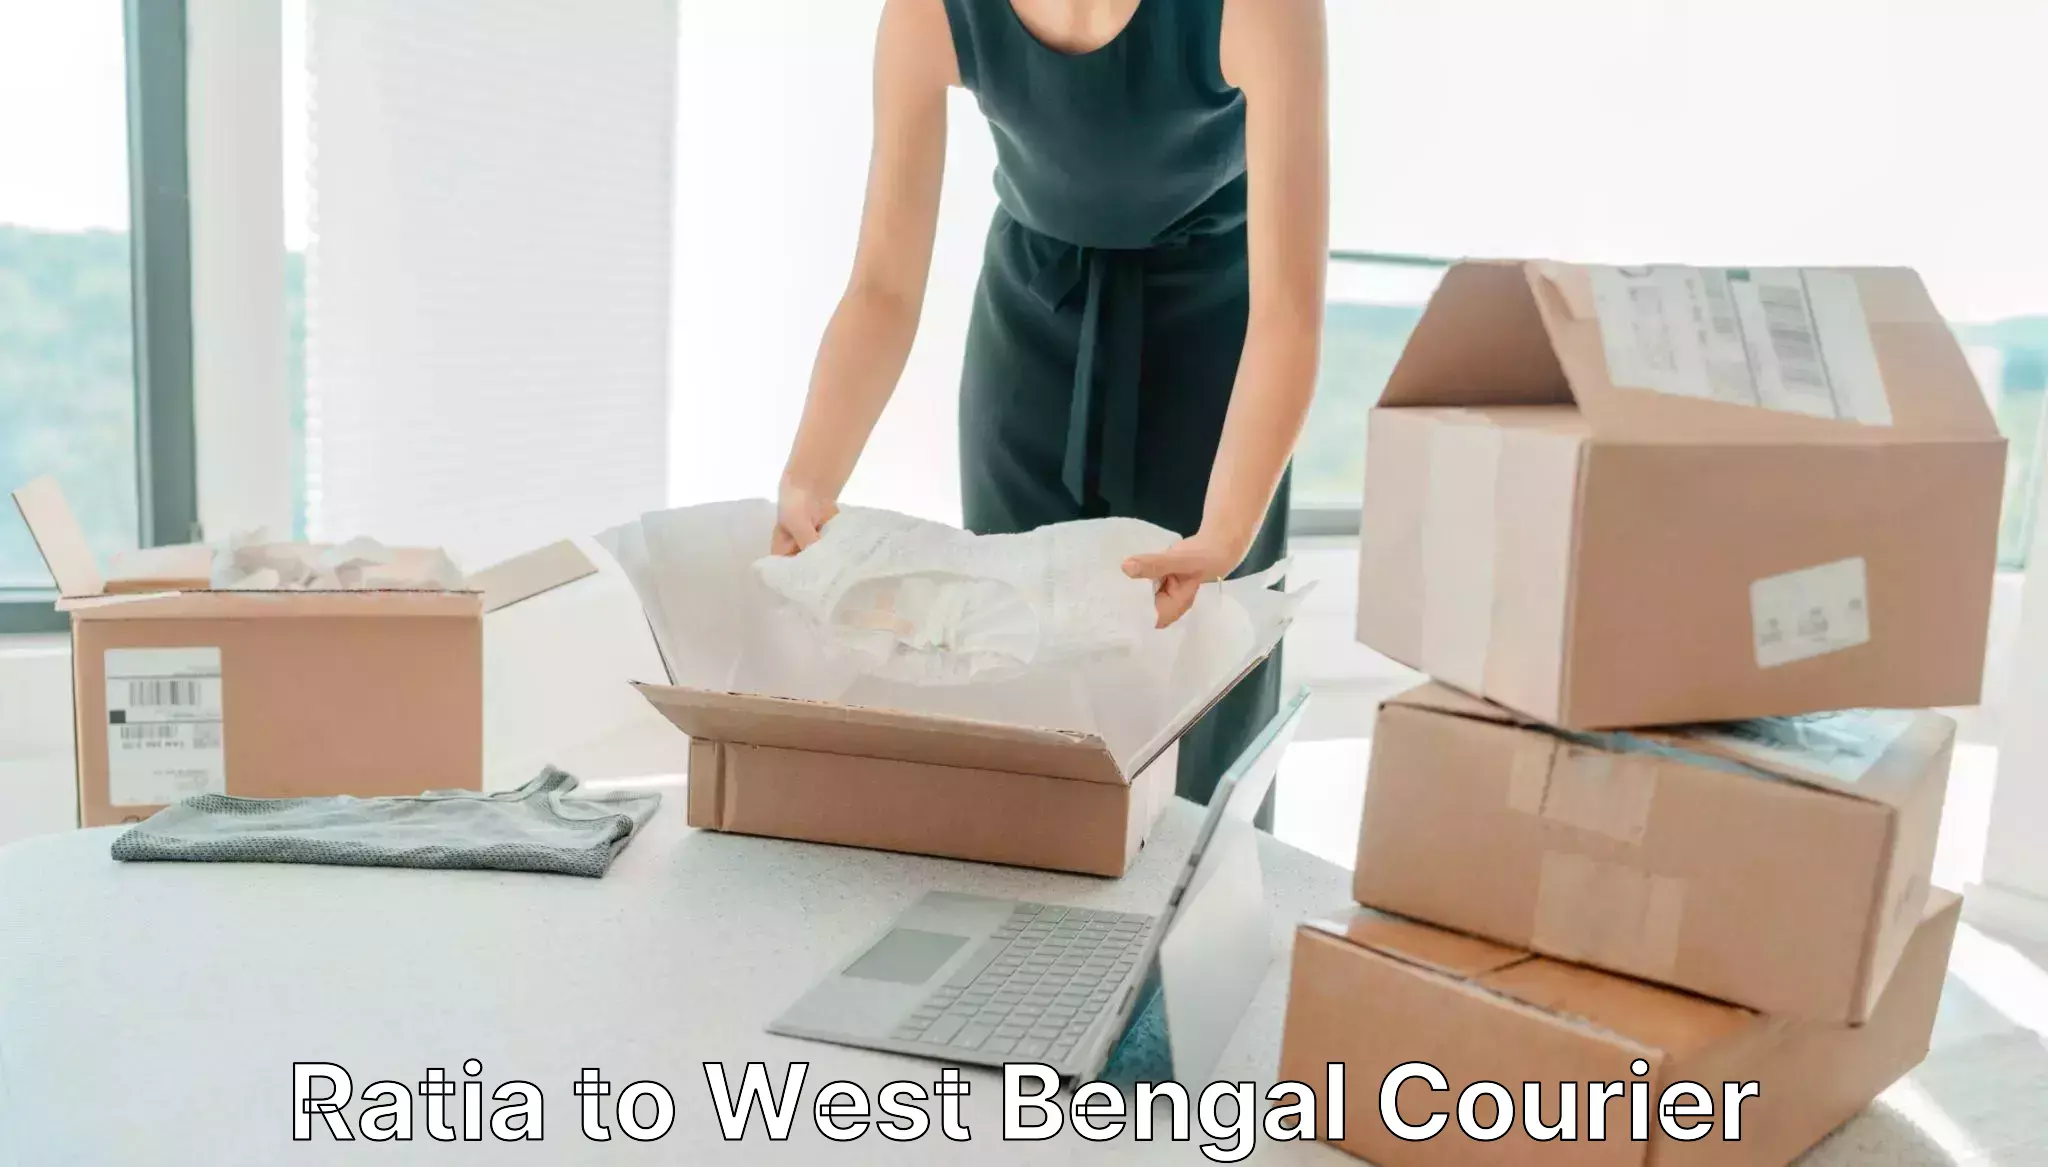 Multi-national courier services Ratia to West Bengal